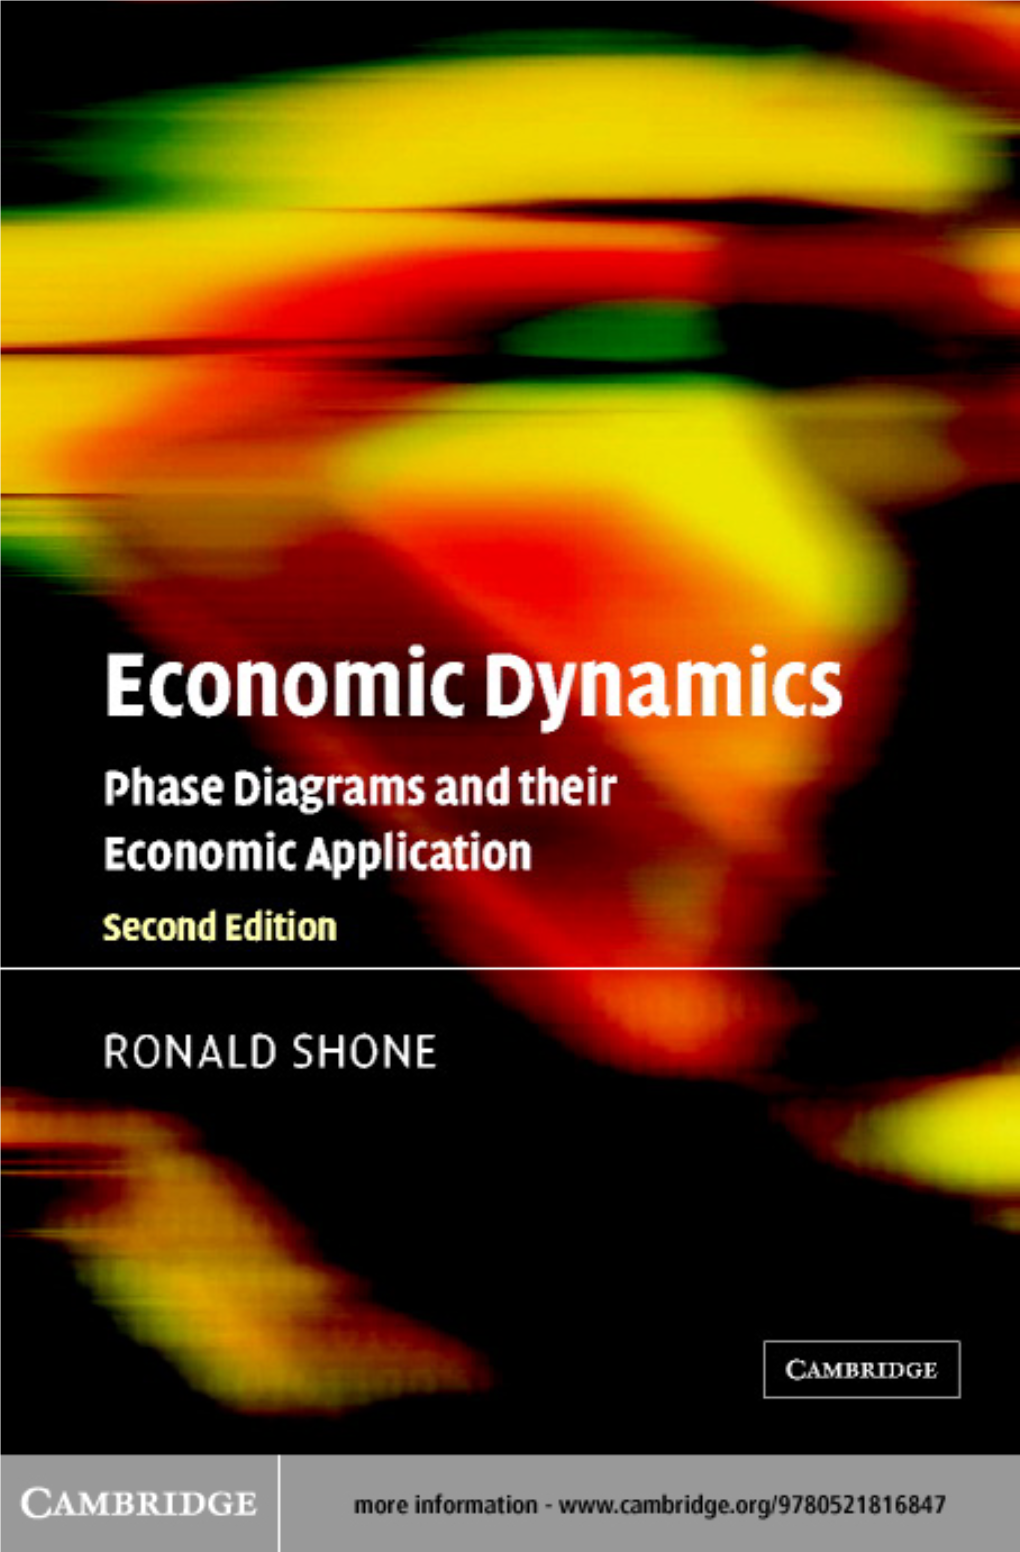 Economic Dynamics: Phase Diagrams and Their Economic Application, Second Edition